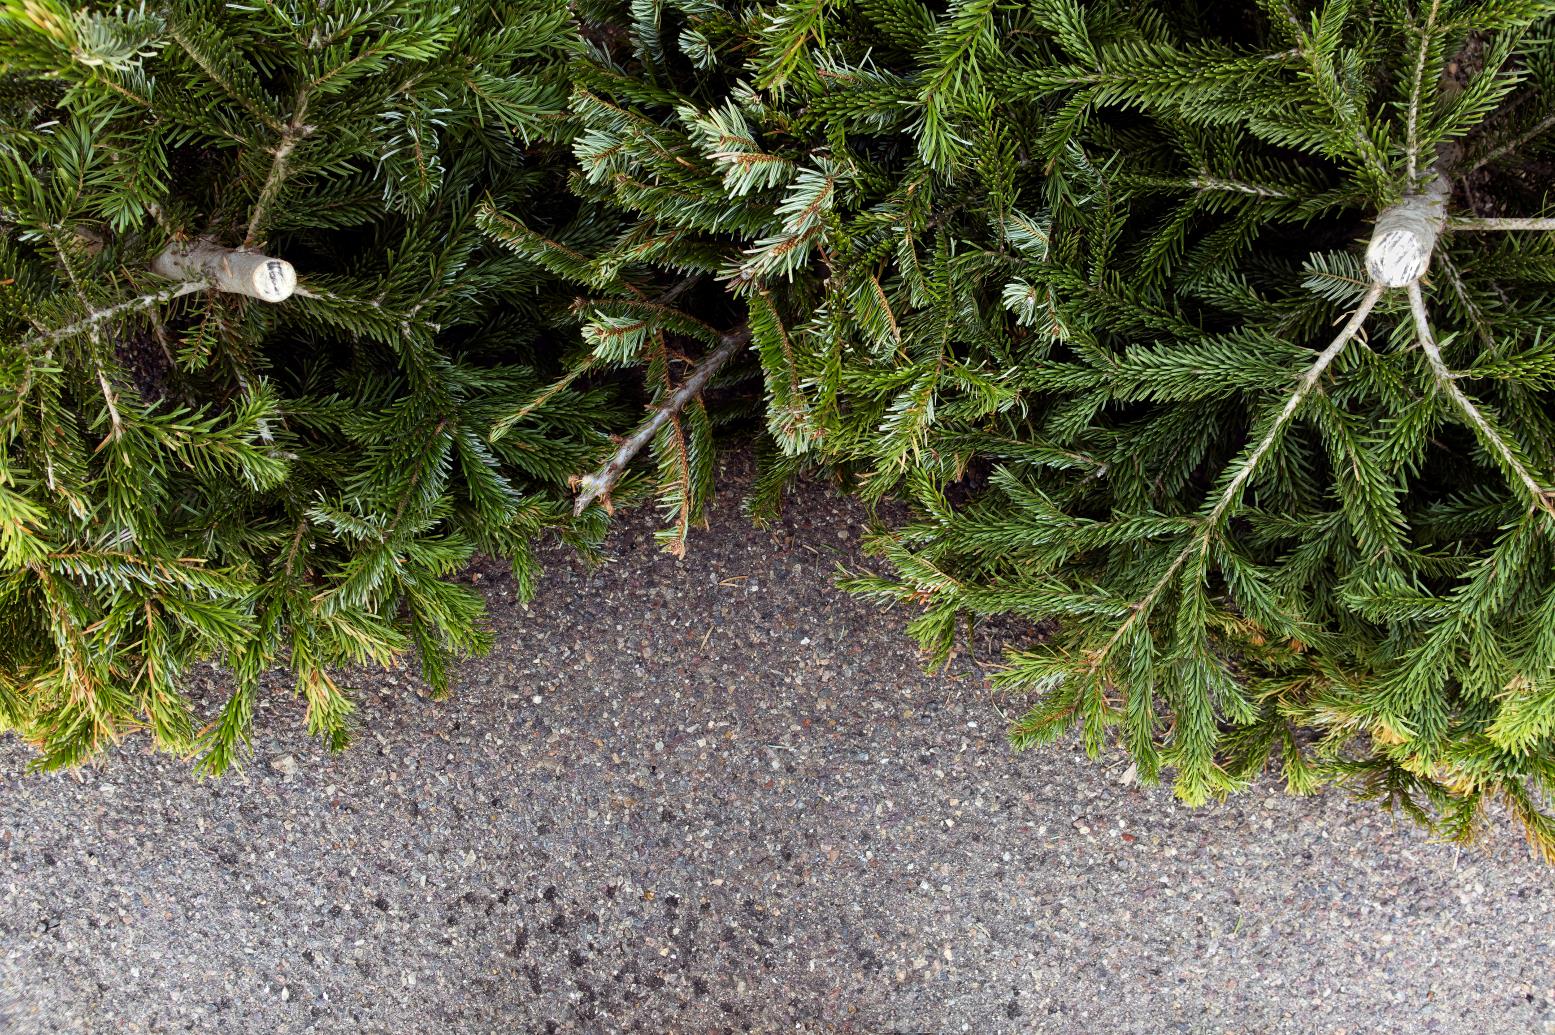 Photo of discarded Christmas trees laying on pavement.